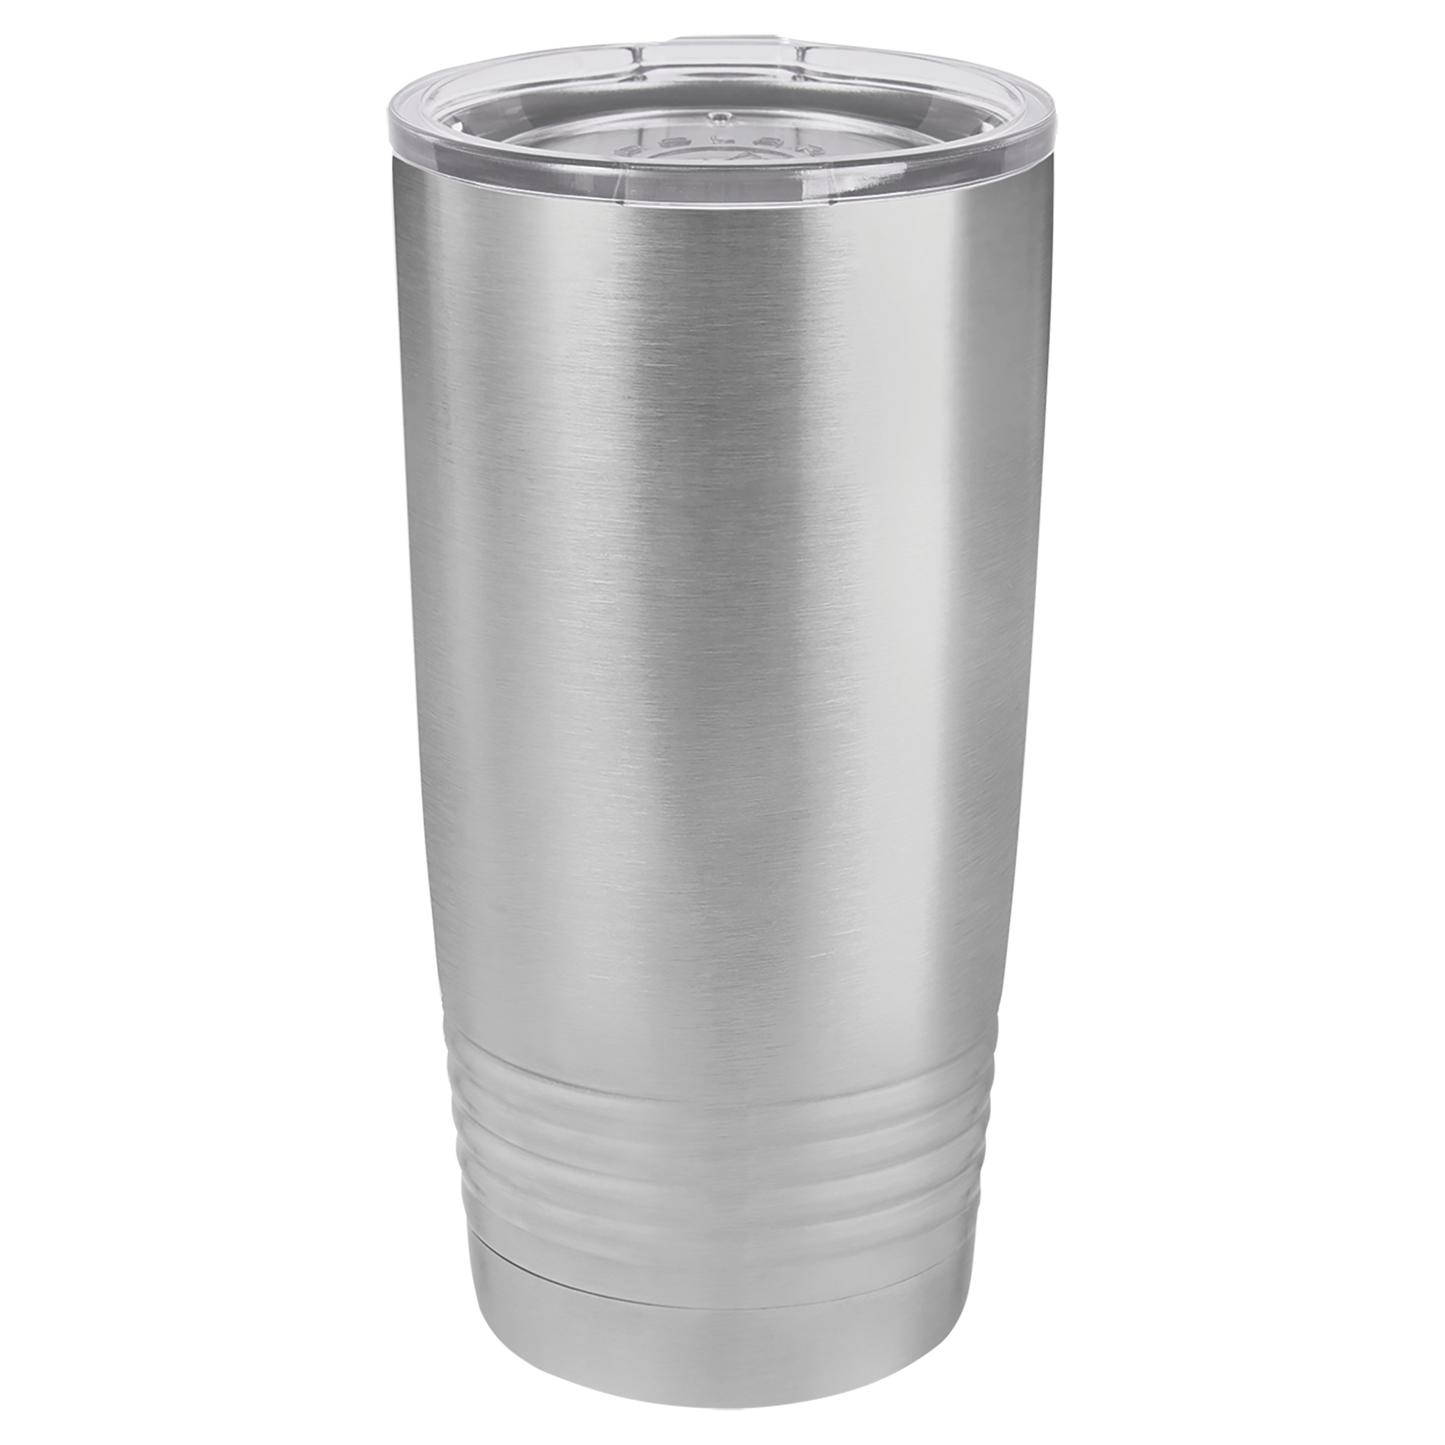 Make your brand pop with Your Logo Or Design Custom Engraved on these sleek tumblers - Special Bulk Wholesale Pricing